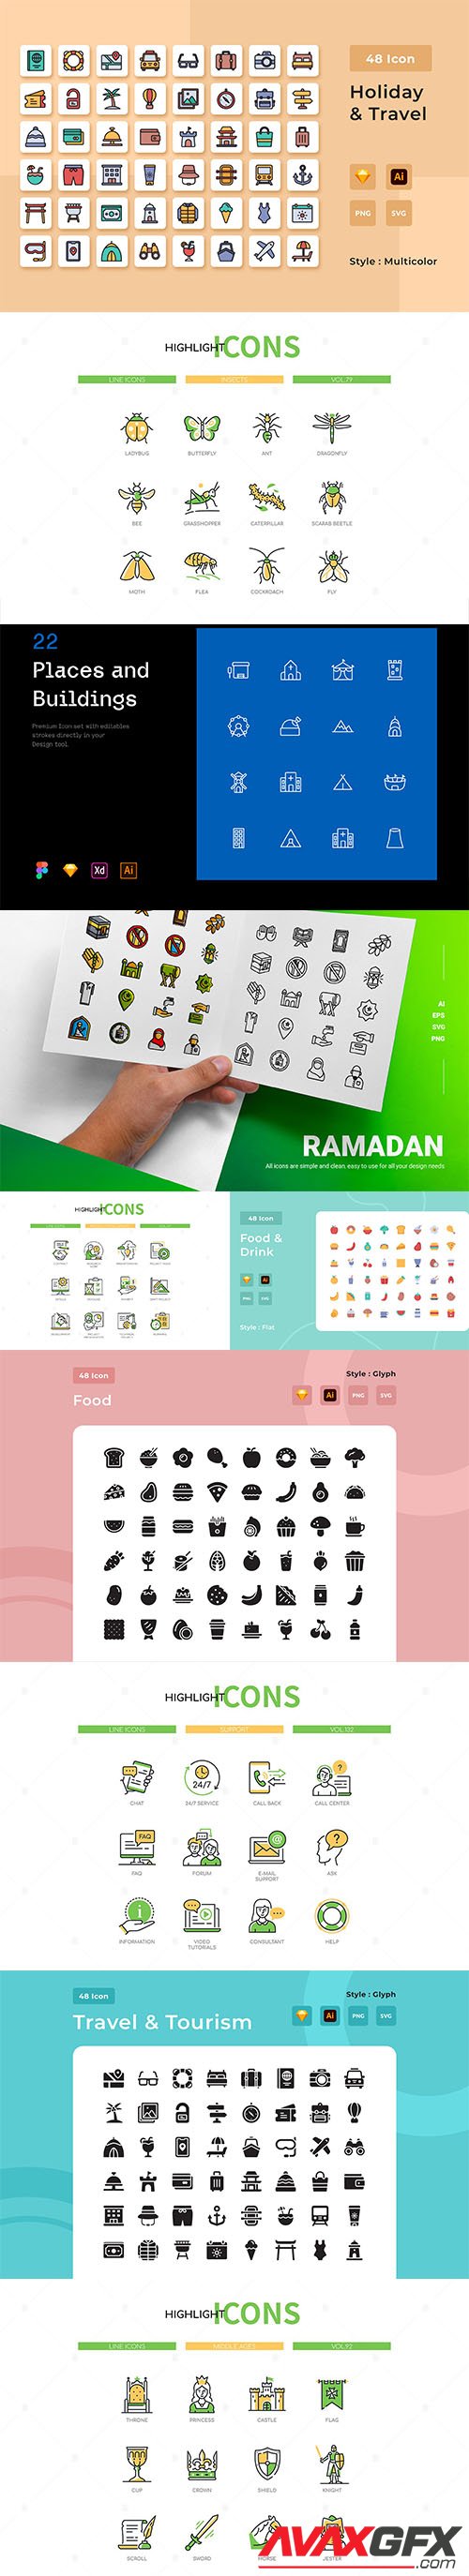 Mix collection of vector icons vol 11